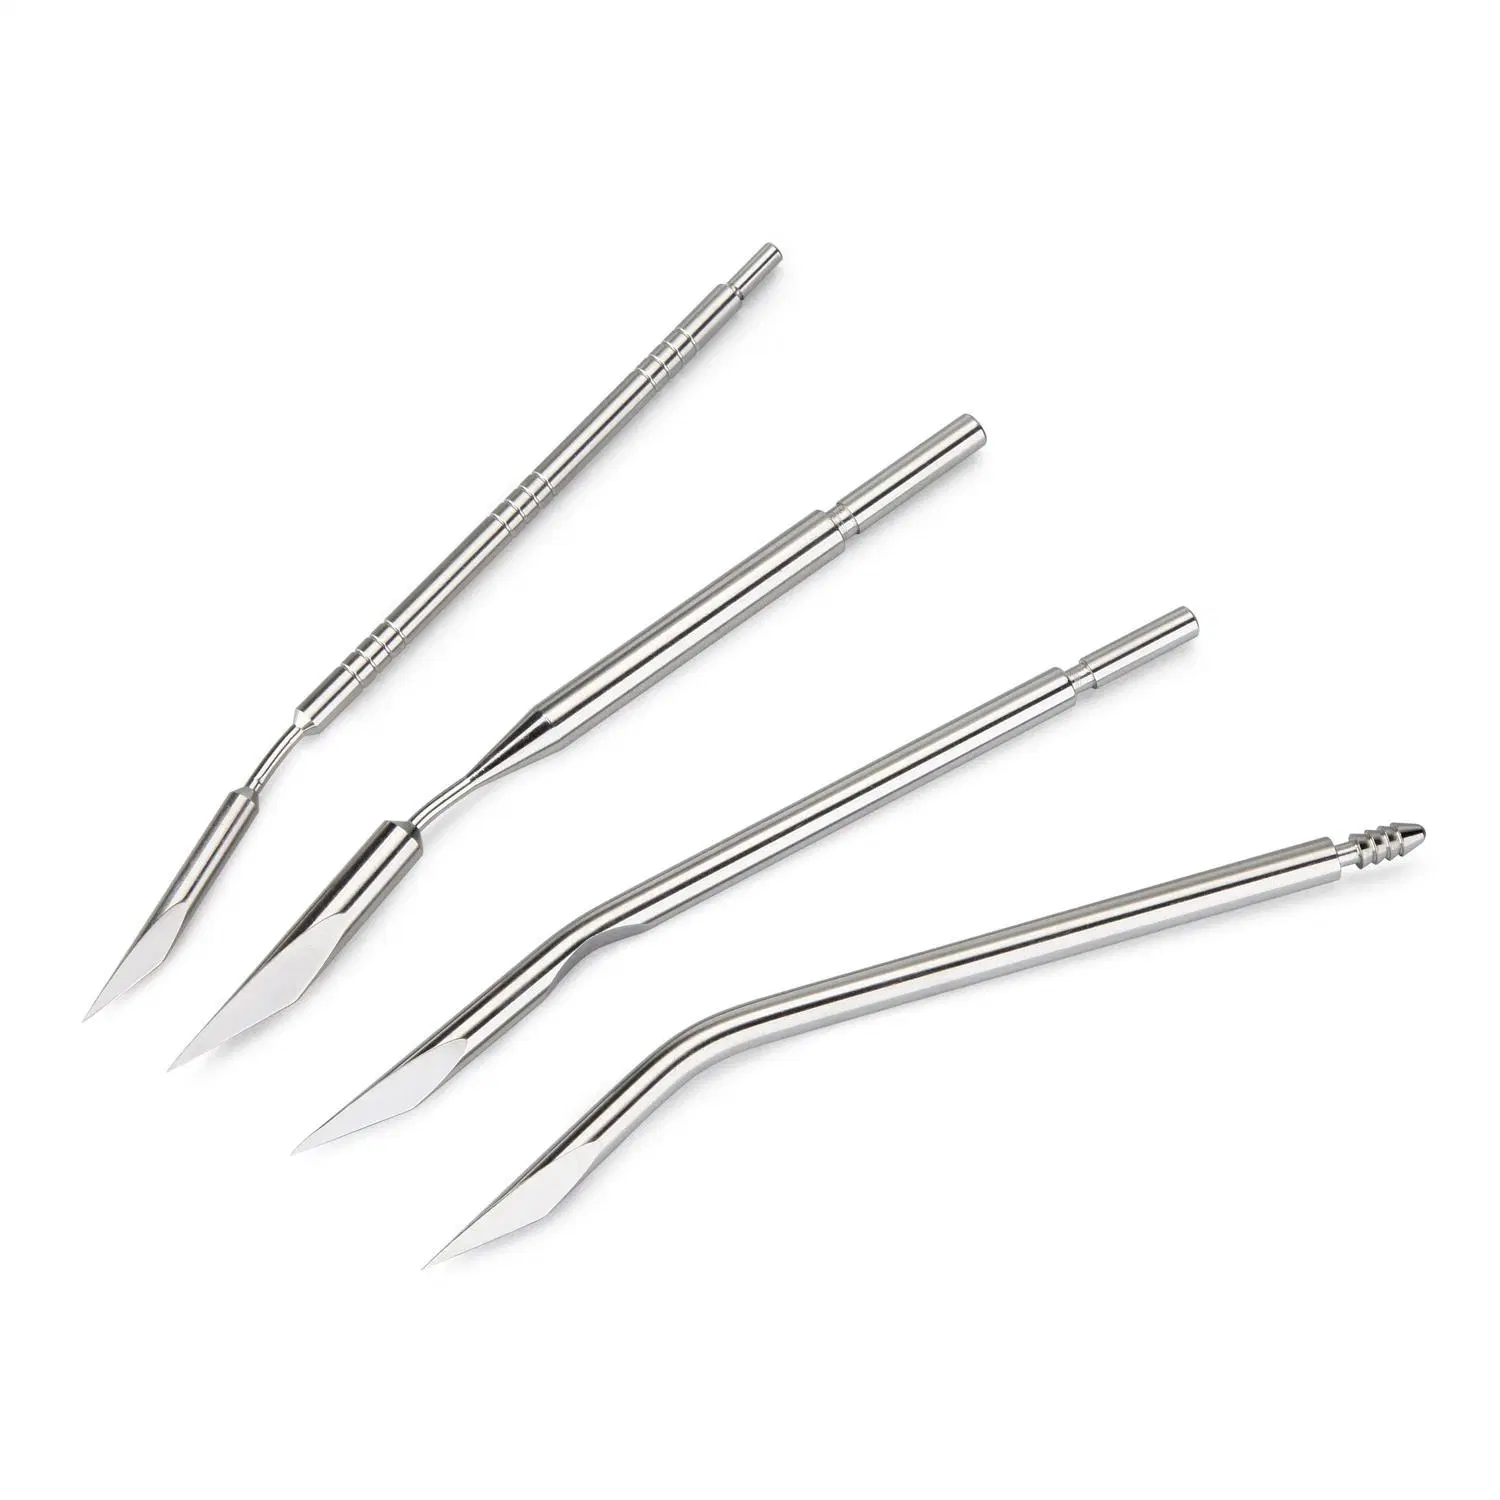 Trocar and Puncture Needle for Orthopedic Surgery Medical Needles